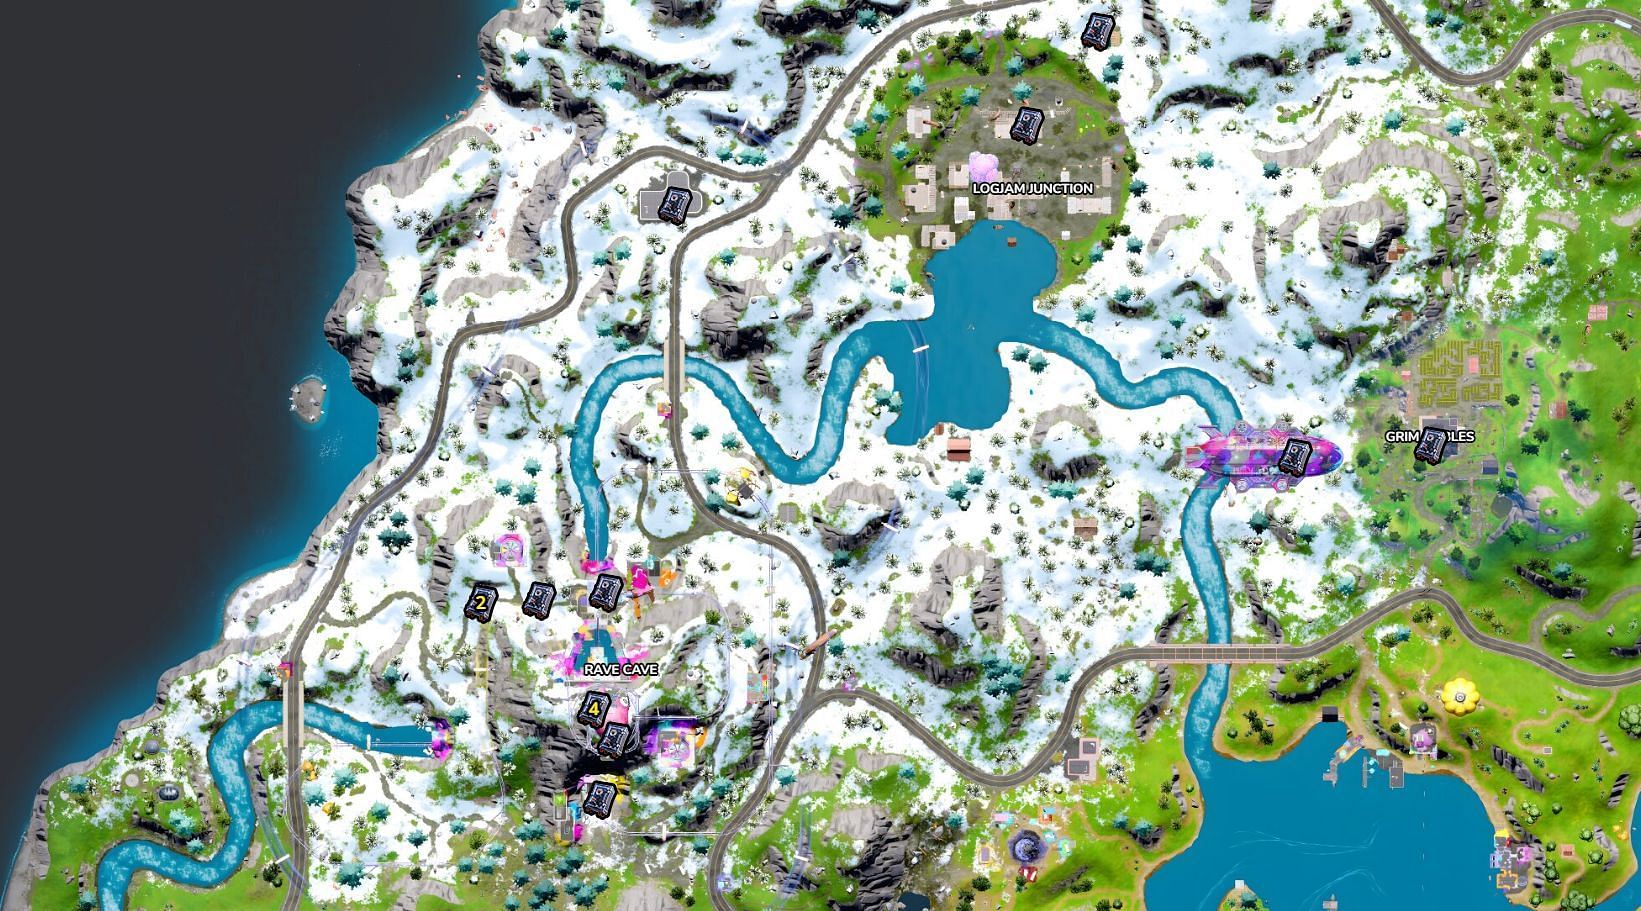 Safes in the Snow/Mountain biome (Image via Fortnite.GG)